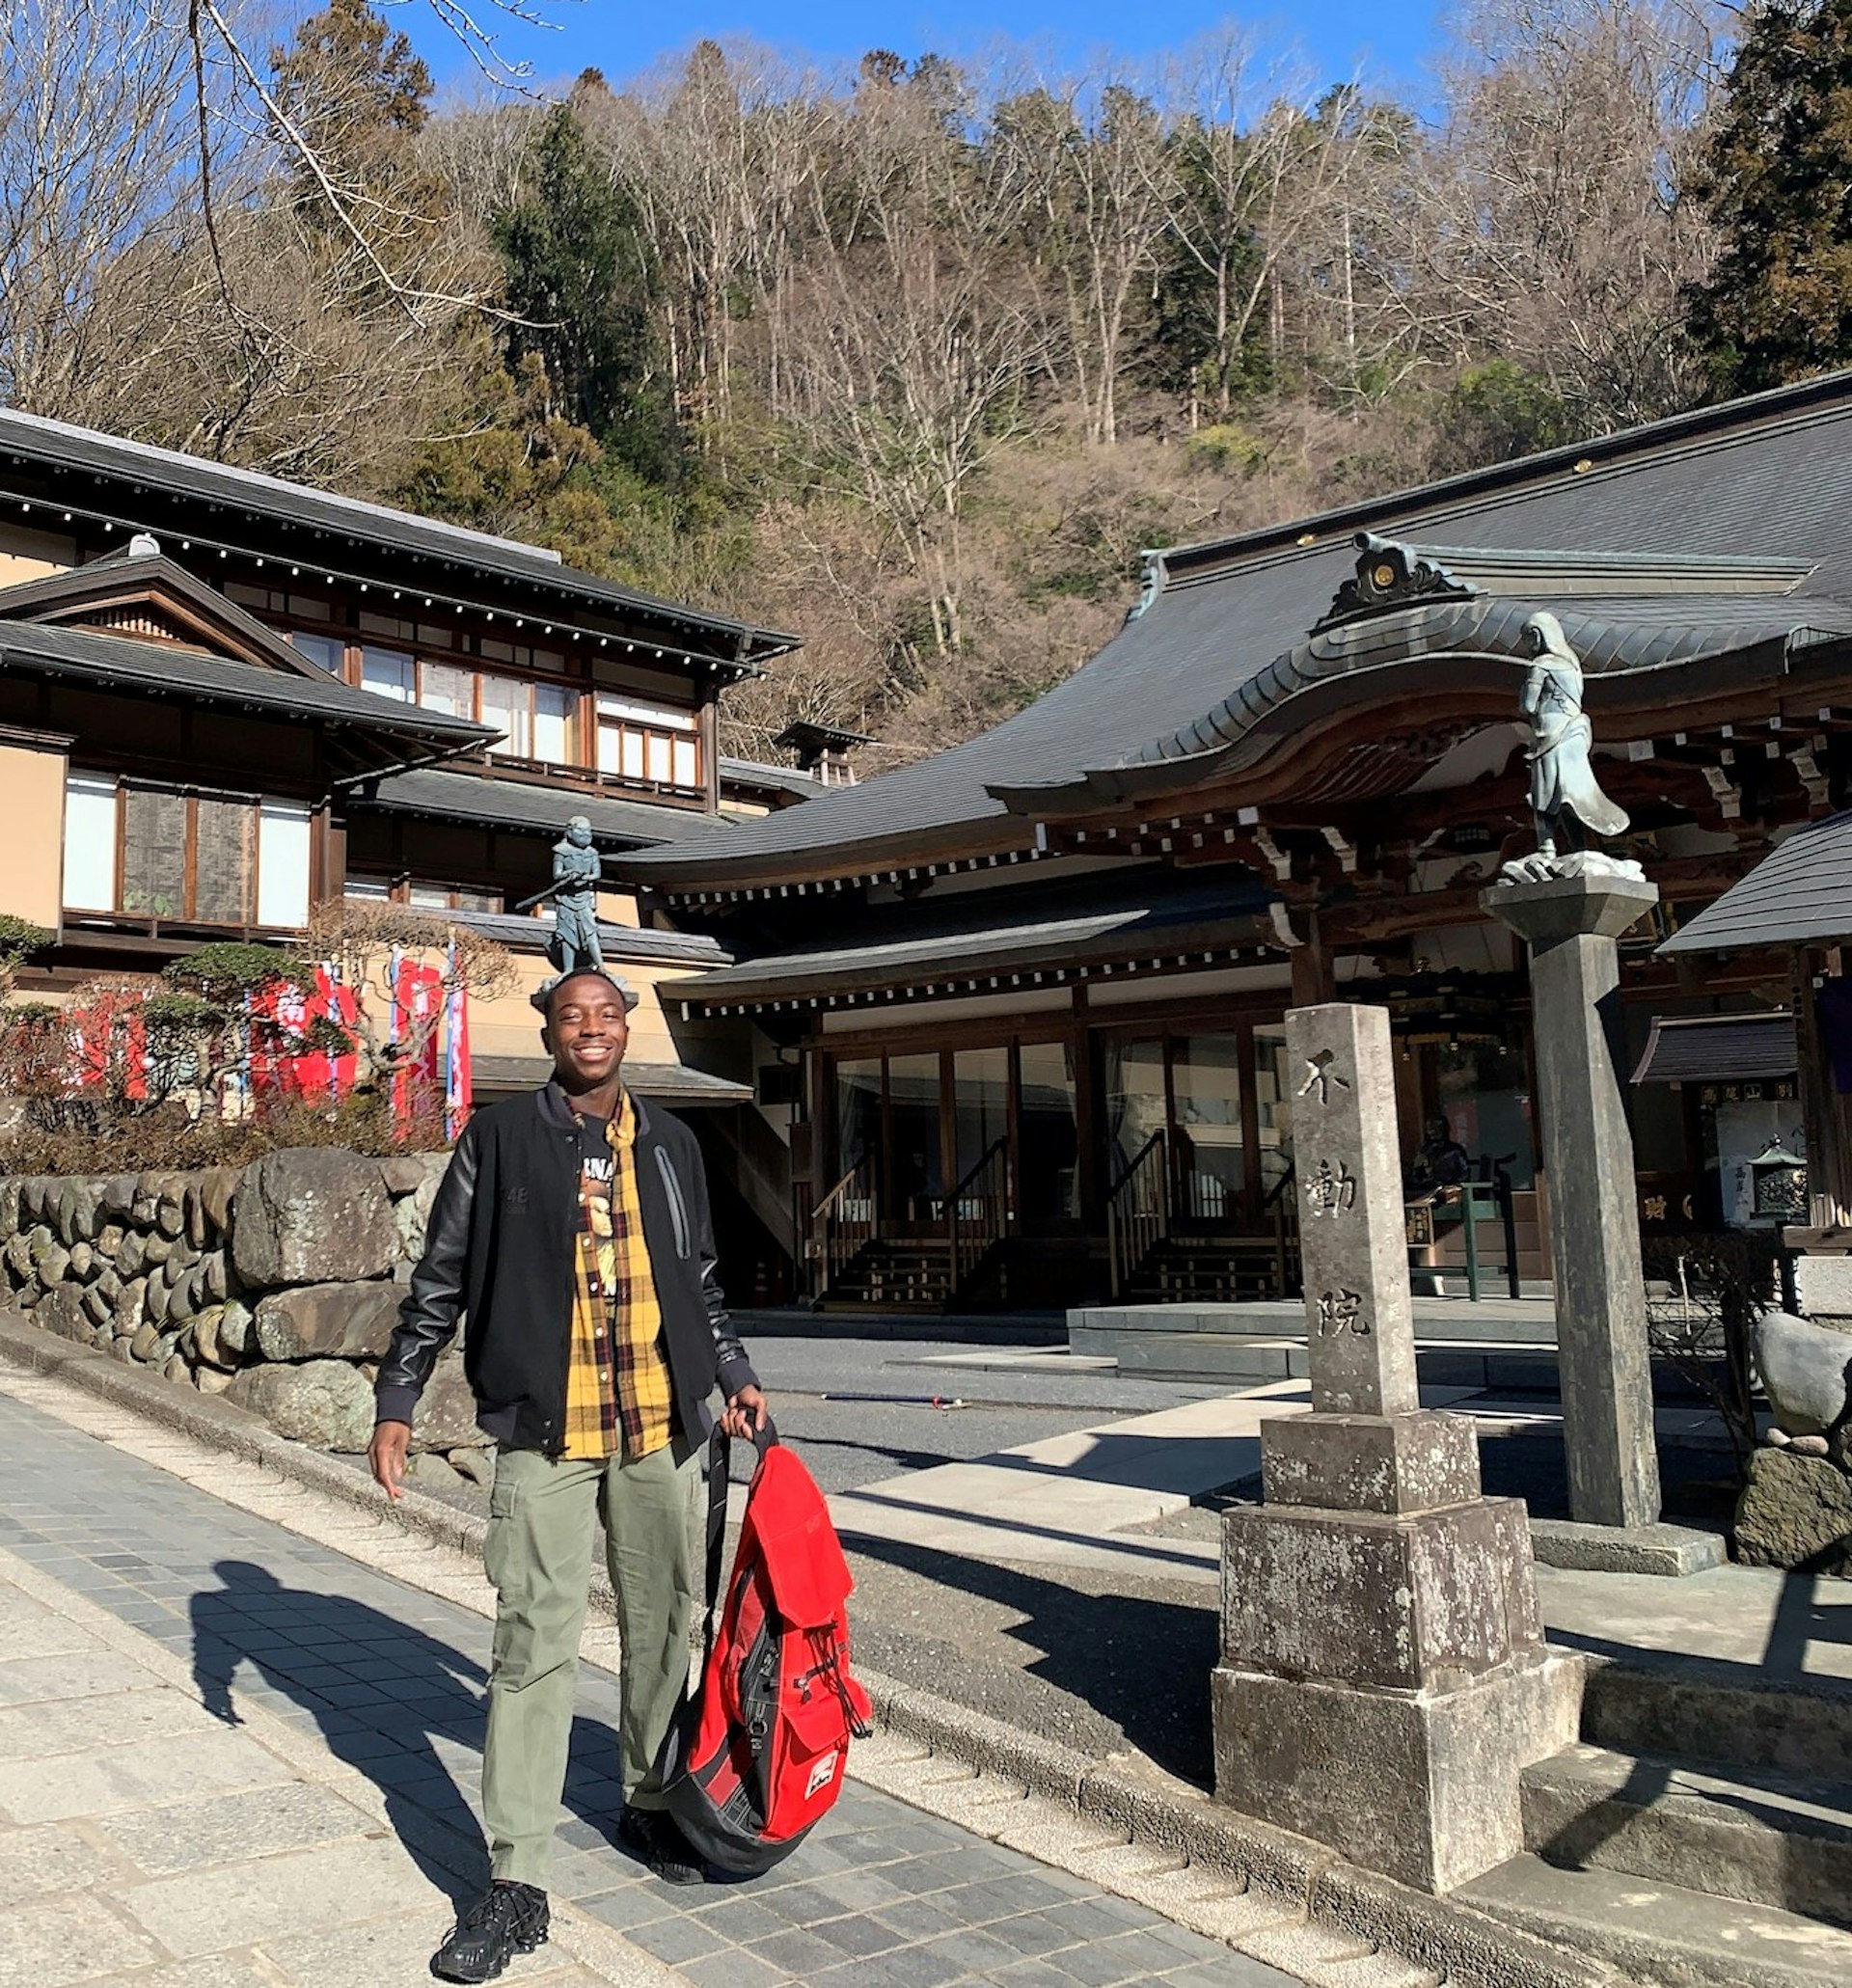 A black man stands outside traditional Japanese architecture and smiles for the camera